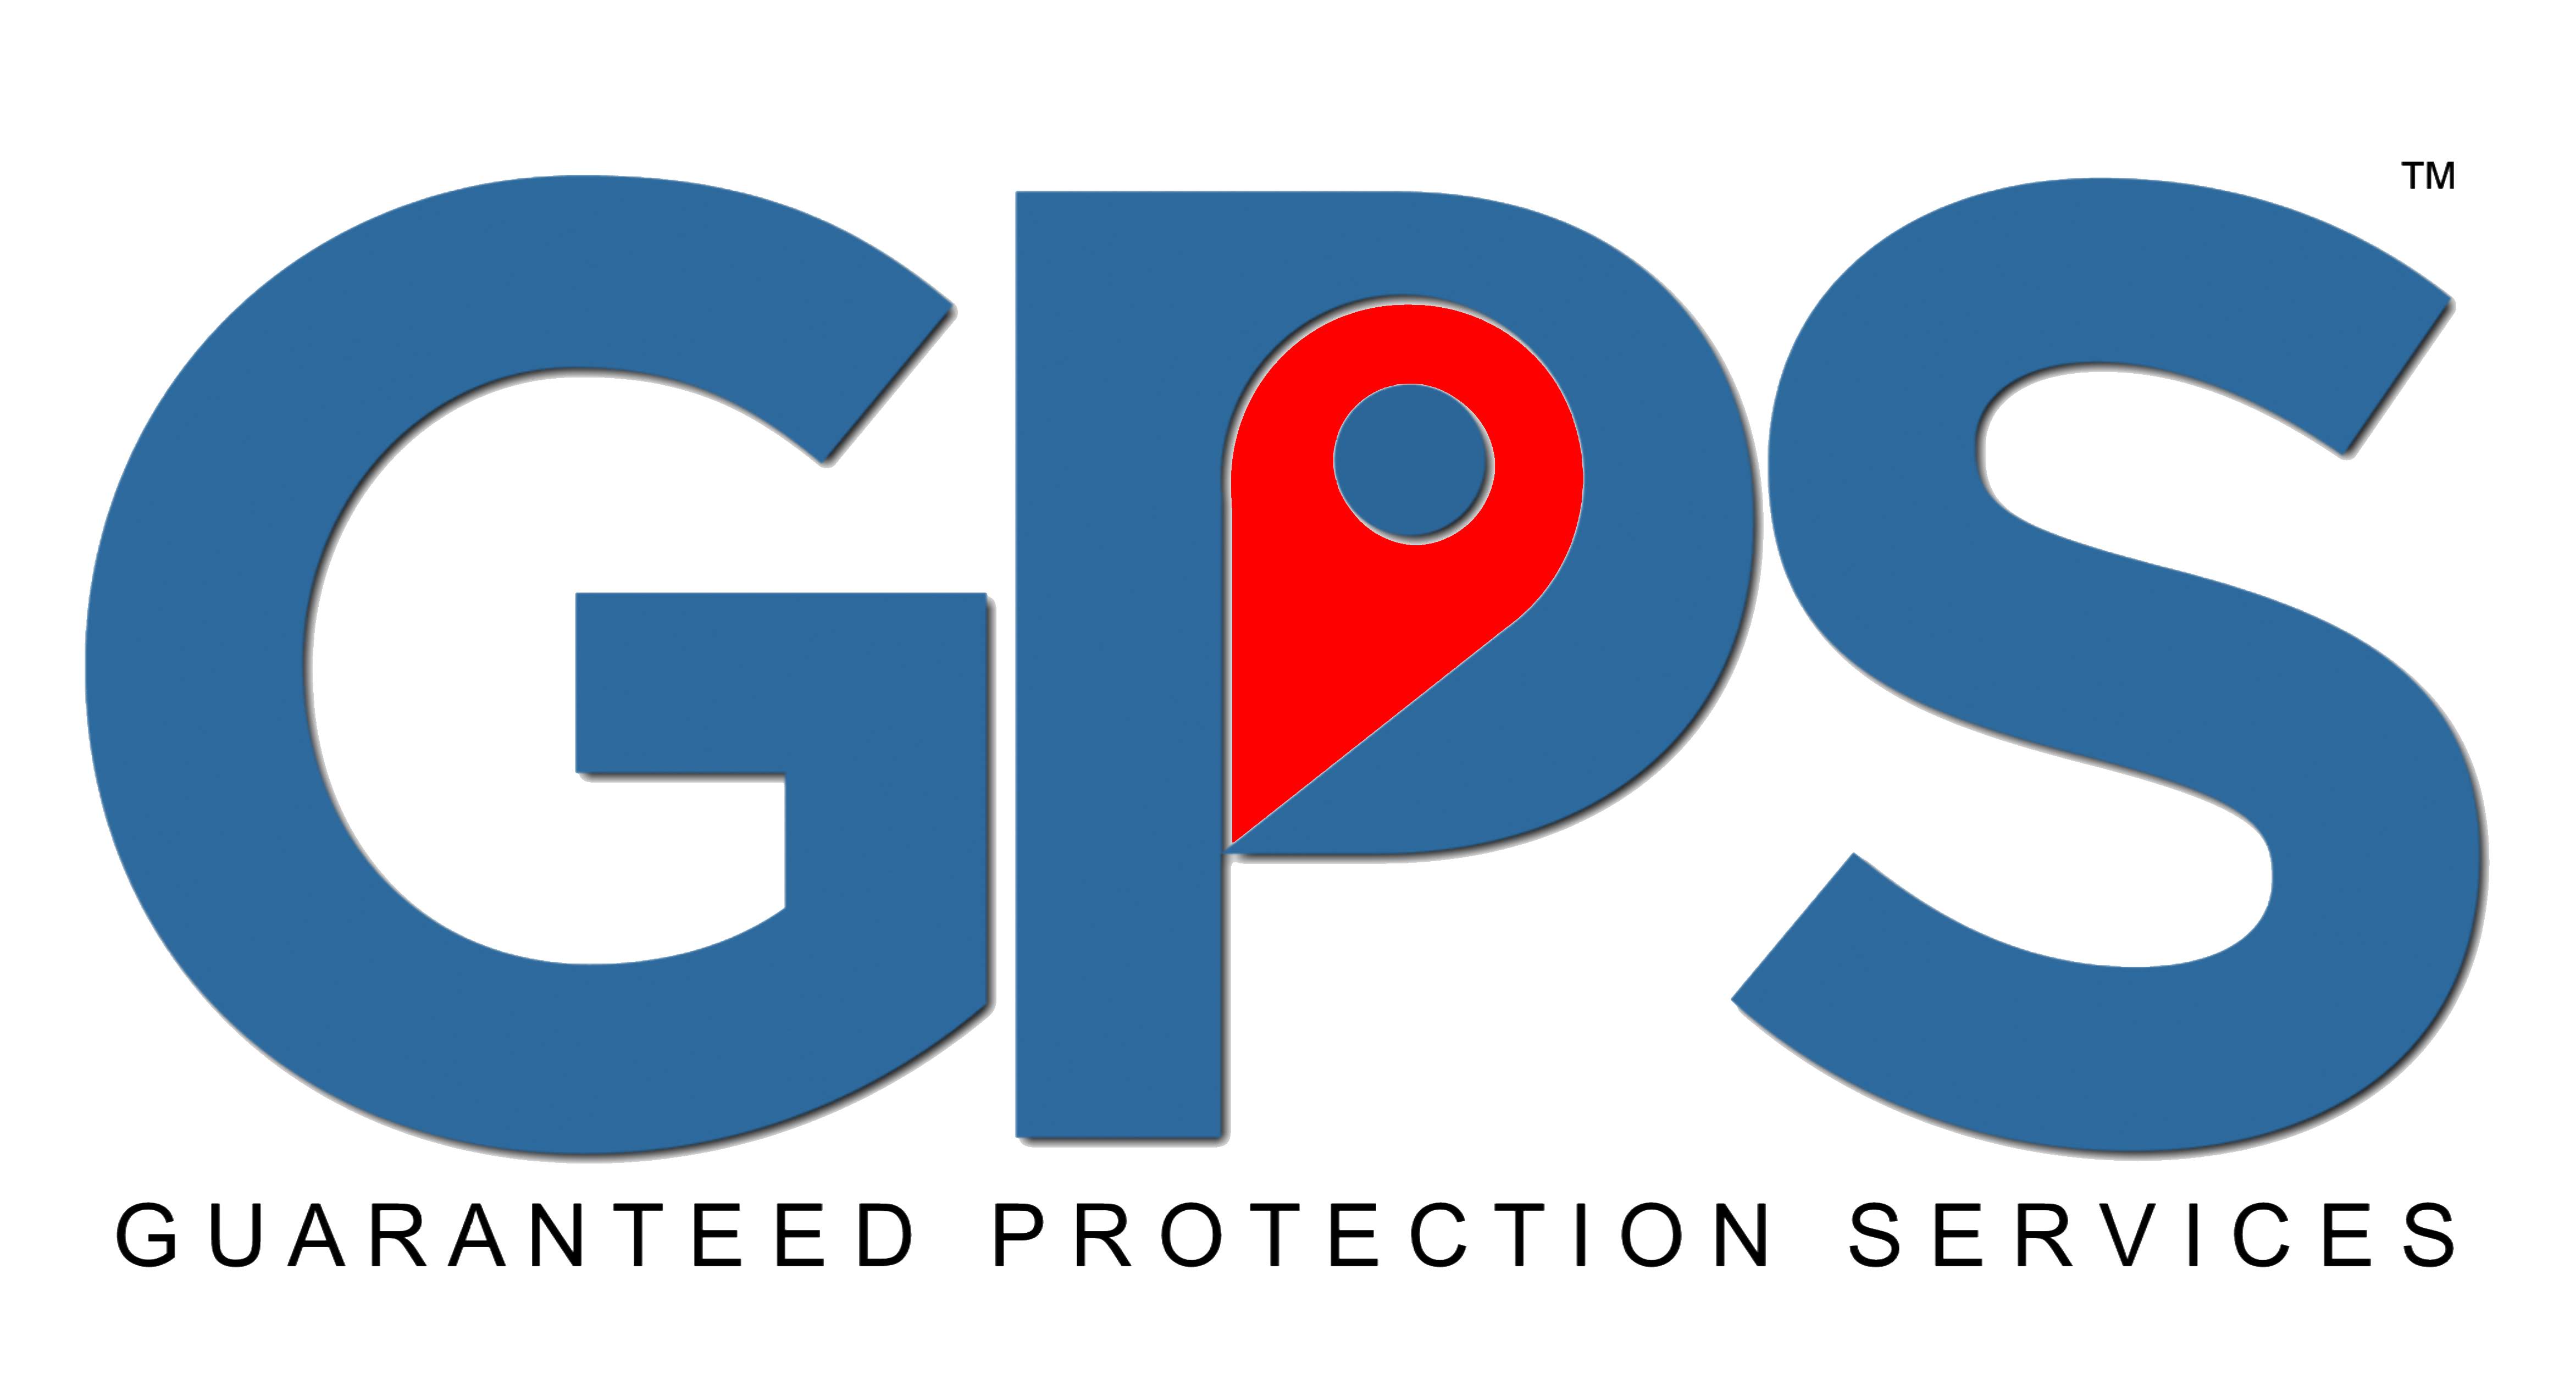 Guaranteed Protection Services